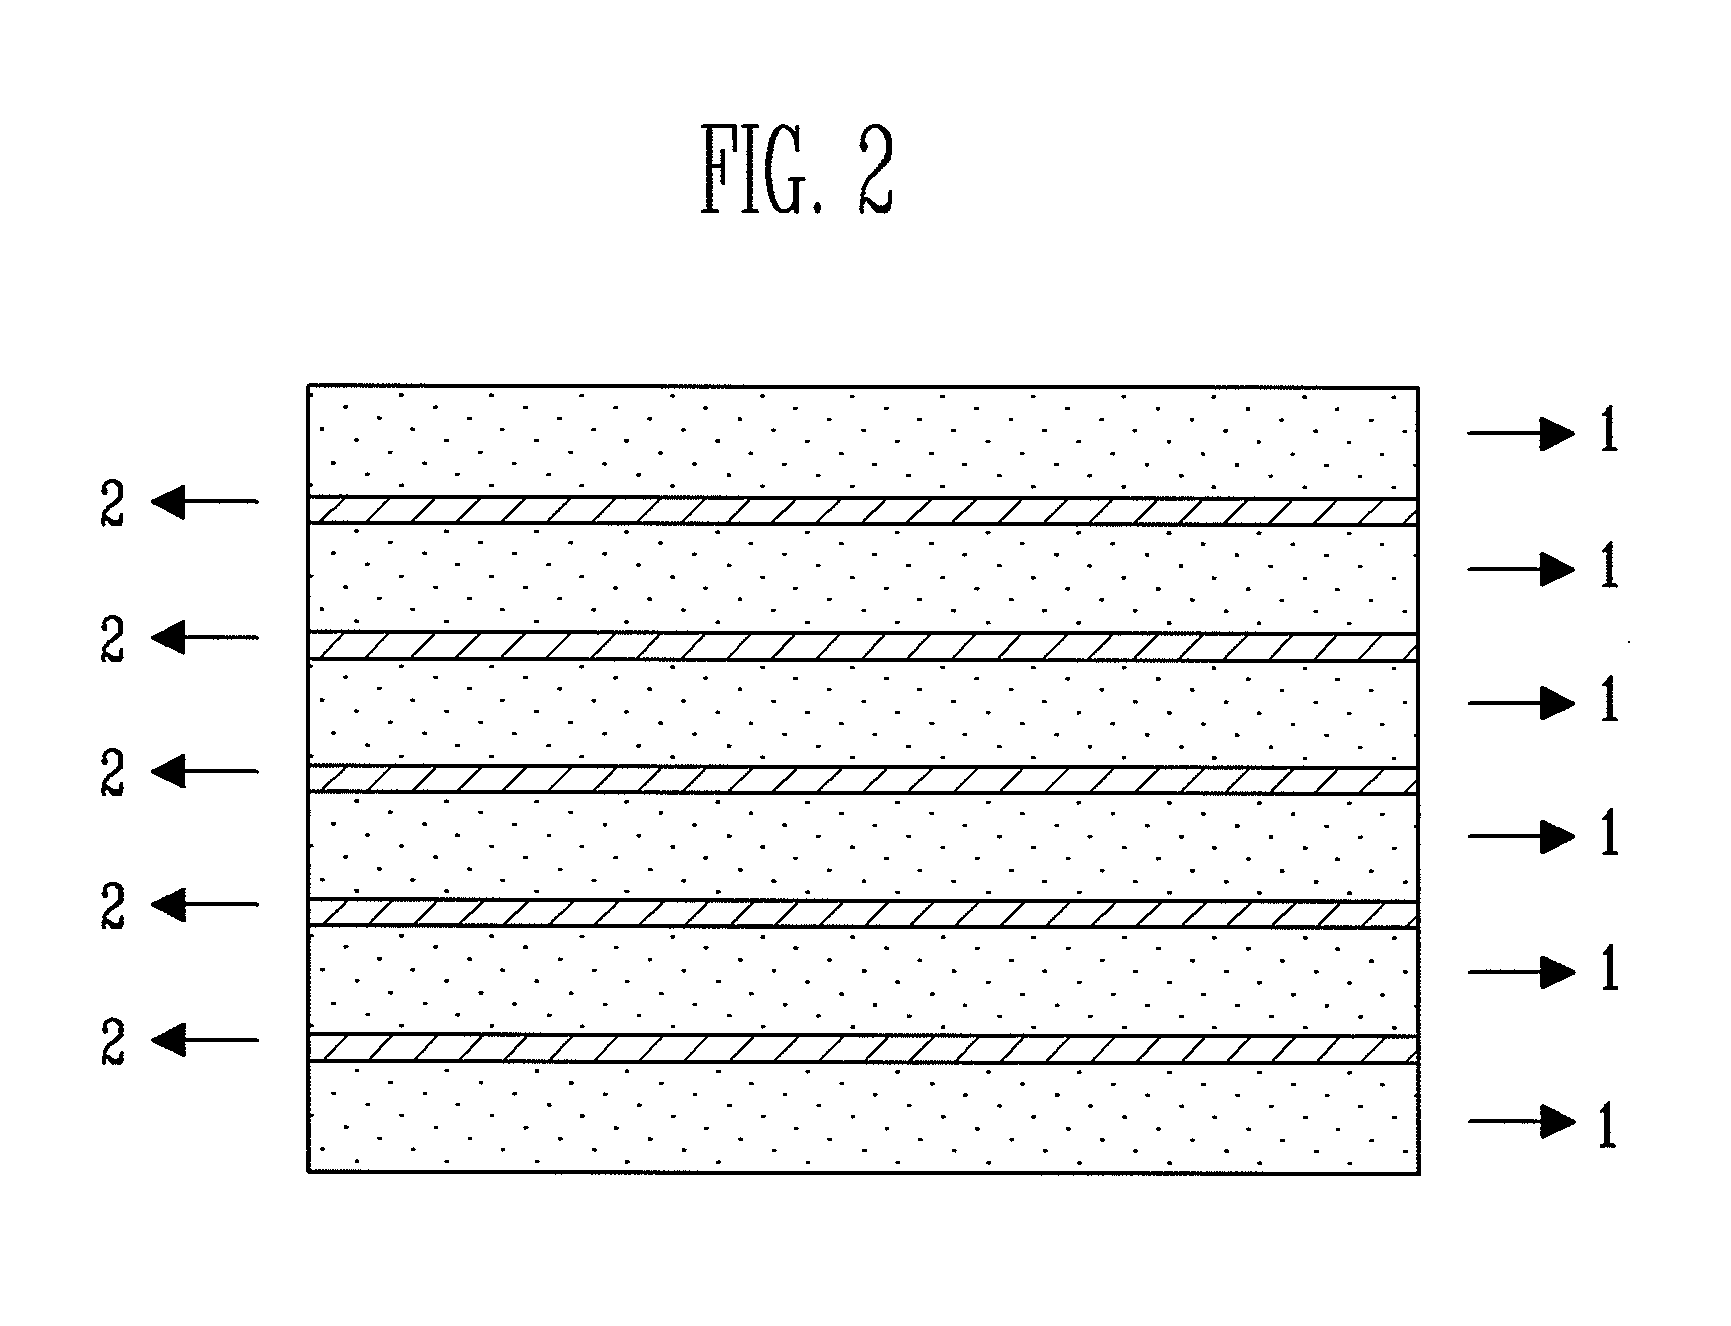 METHOD OF MANUFACTURING P-TYPE ZnO SEMICONDUCTOR LAYER USING ATOMIC LAYER DEPOSITION AND THIN FILM TRANSISTOR INCLUDING THE P-TYPE ZnO SEMICONDUCTOR LAYER